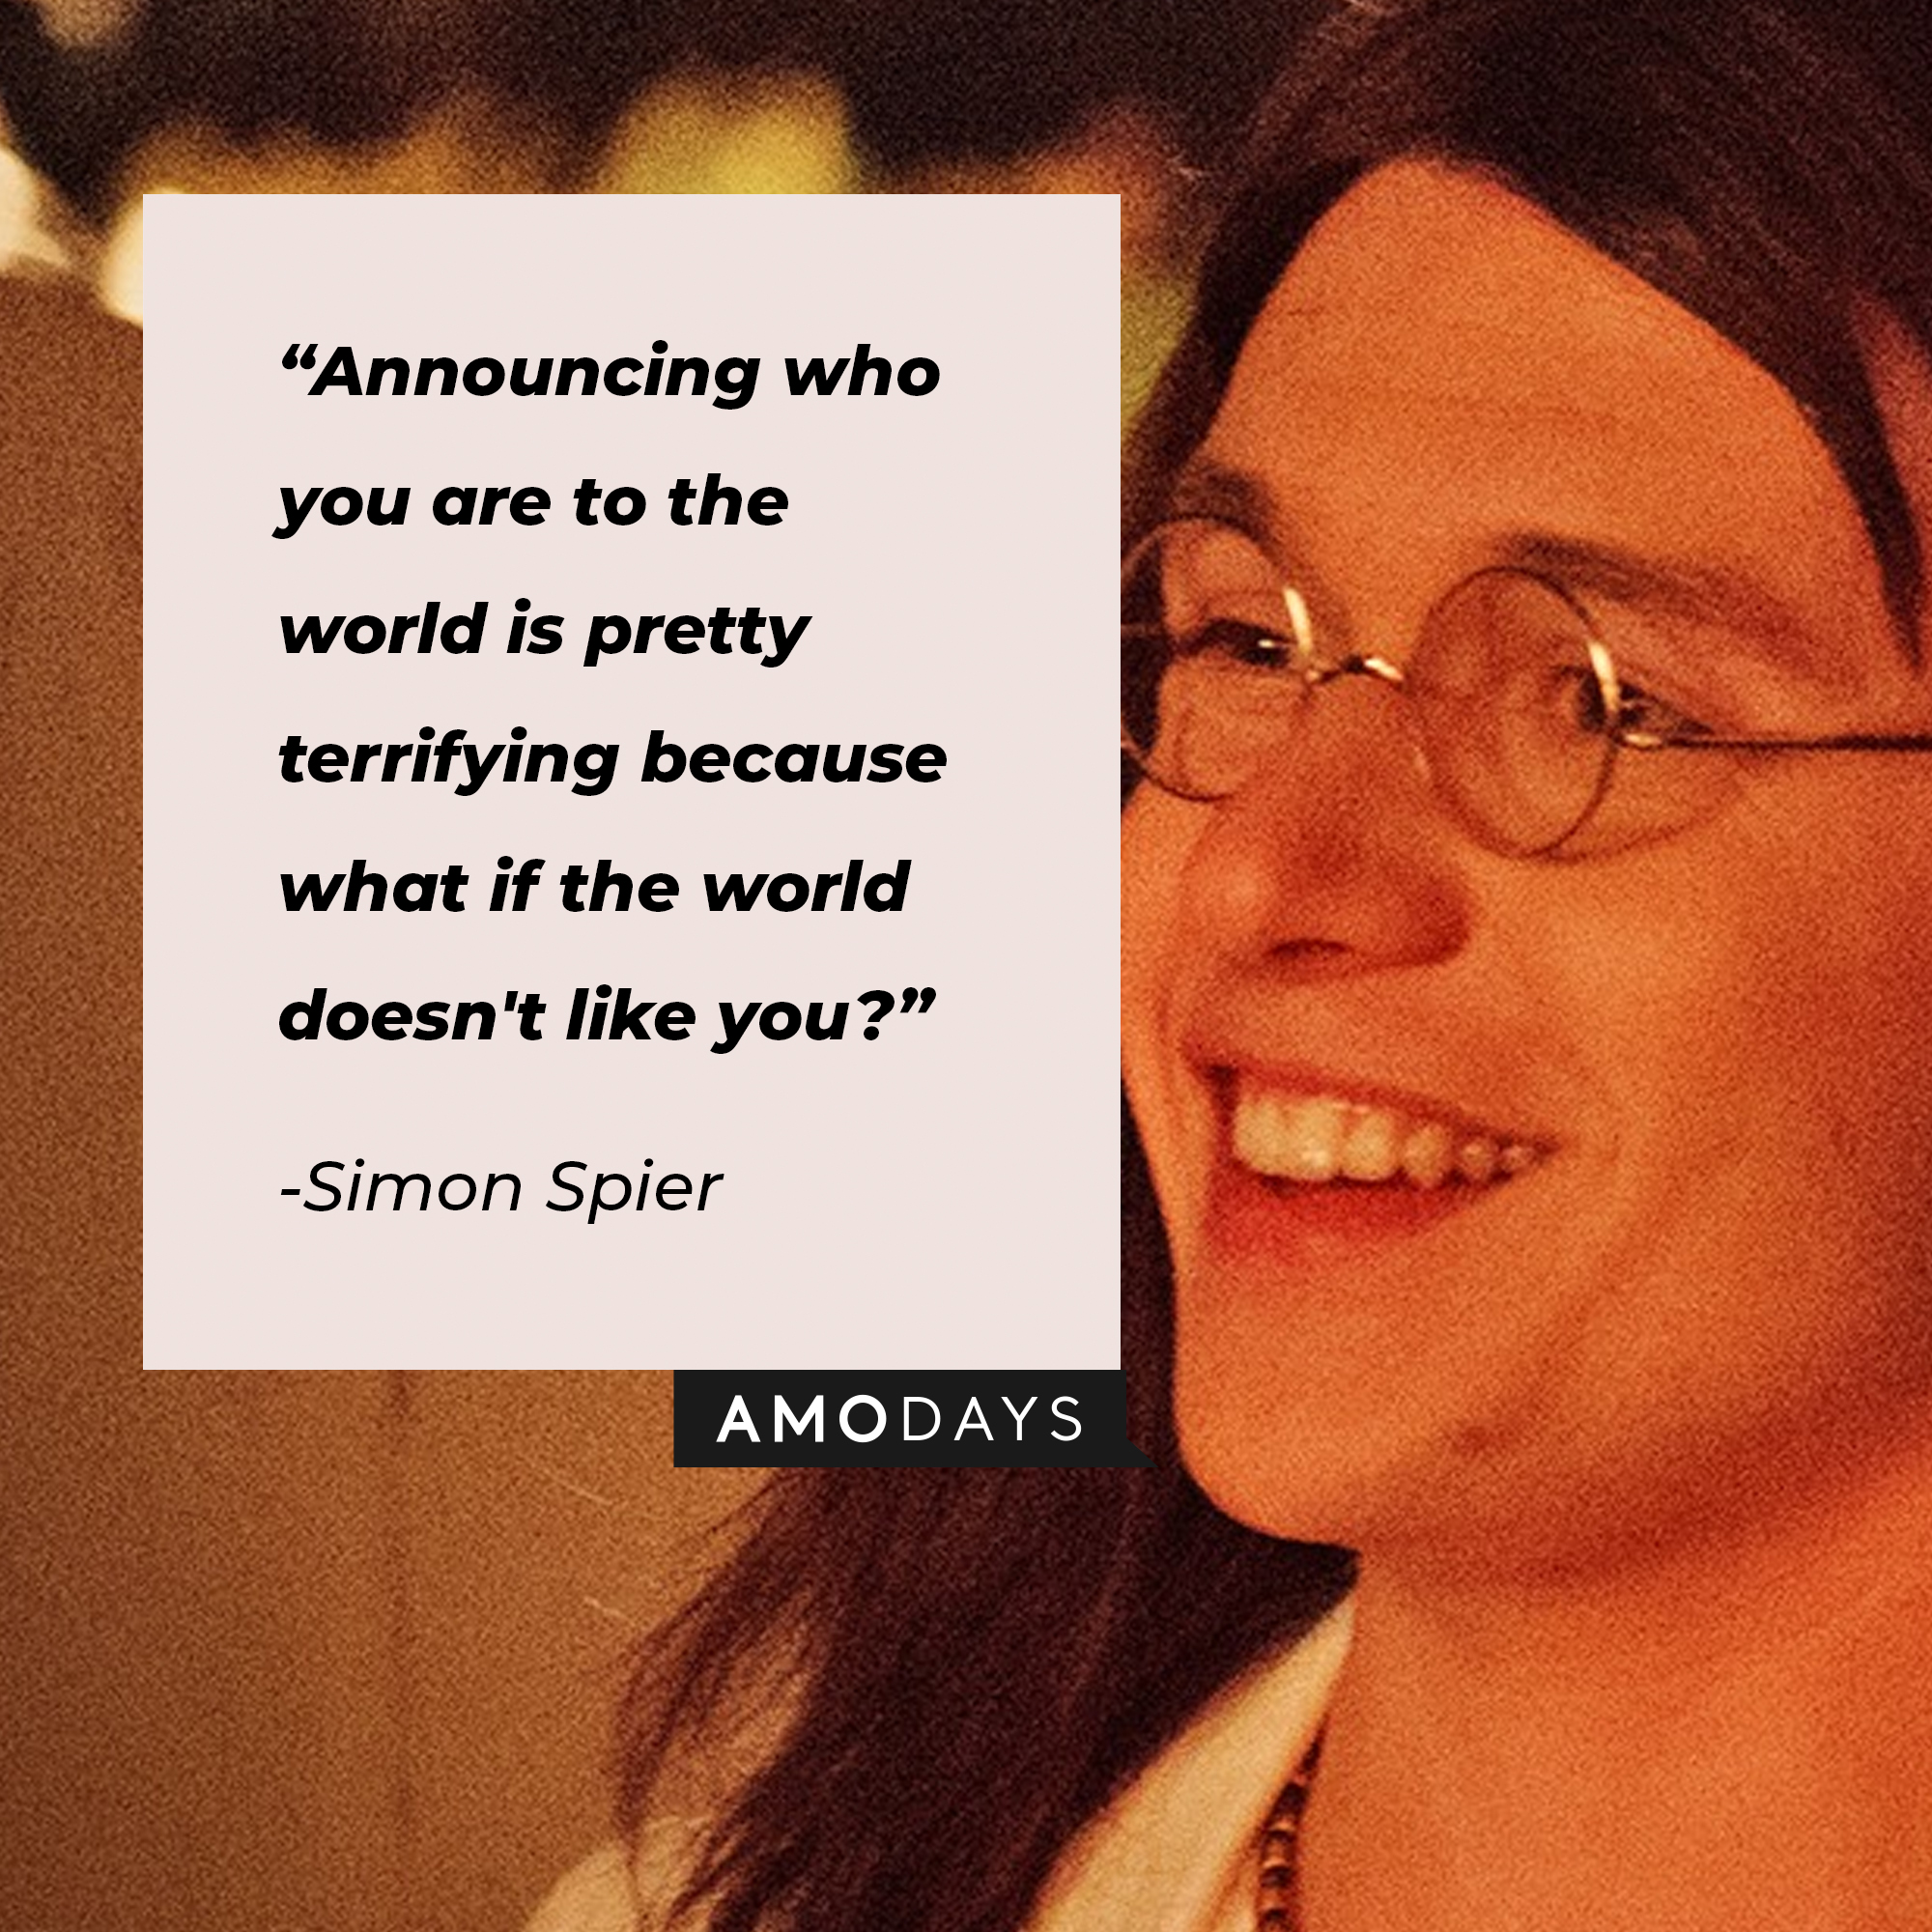 Simon Spier's quote, "Announcing who you are to the world is pretty terrifying because what if the world doesn't like you?" | Image: facebook.com/LoveSimonMovie